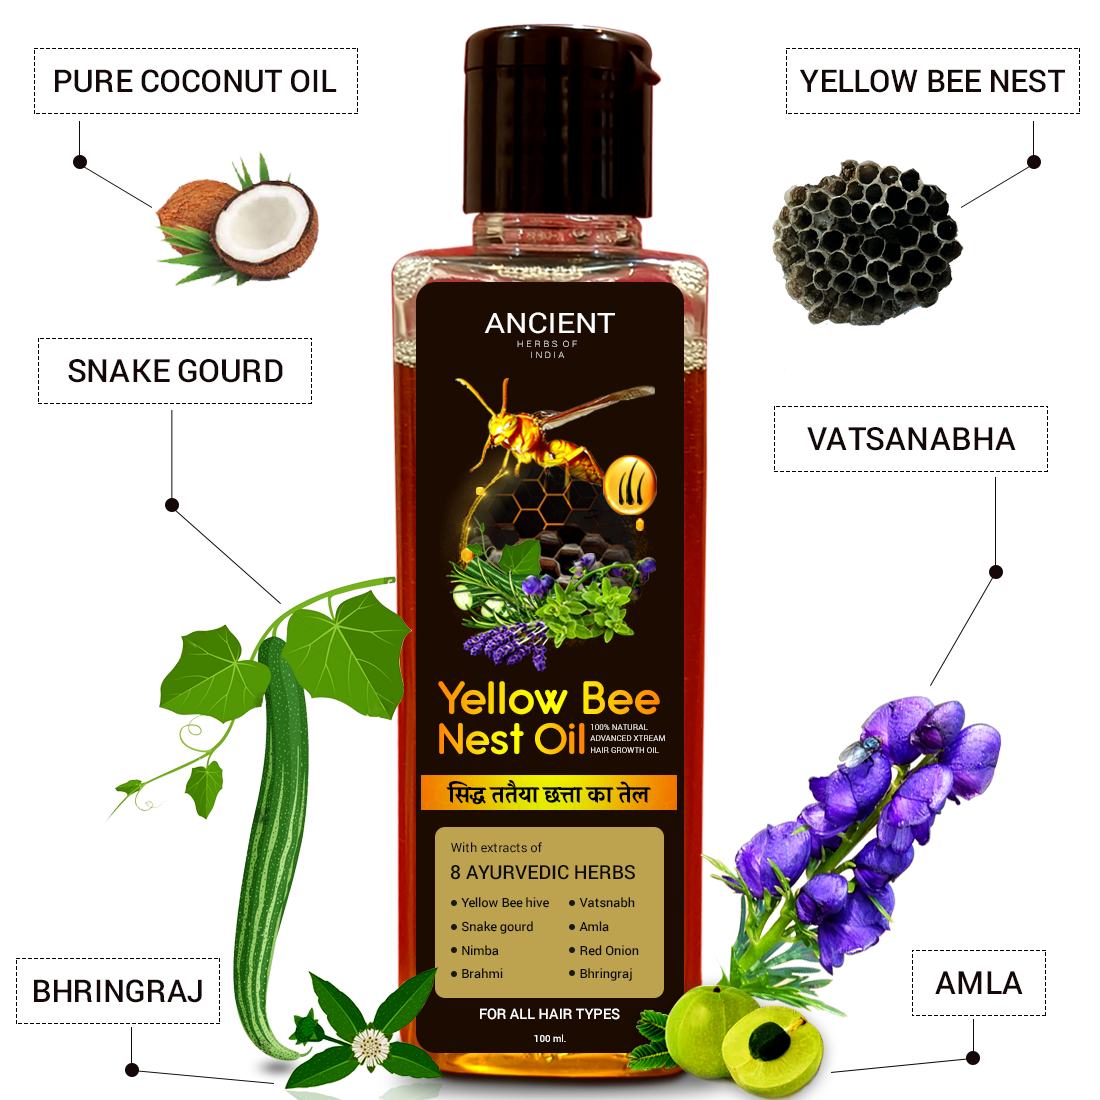 Advanced Yellow bee nest oil For Men and Women For Hair Fall Control and Hair Growth | Natural Extract of Snakeguard and Vastnabh For Hair Regrowth | 100% Pure and Handmade